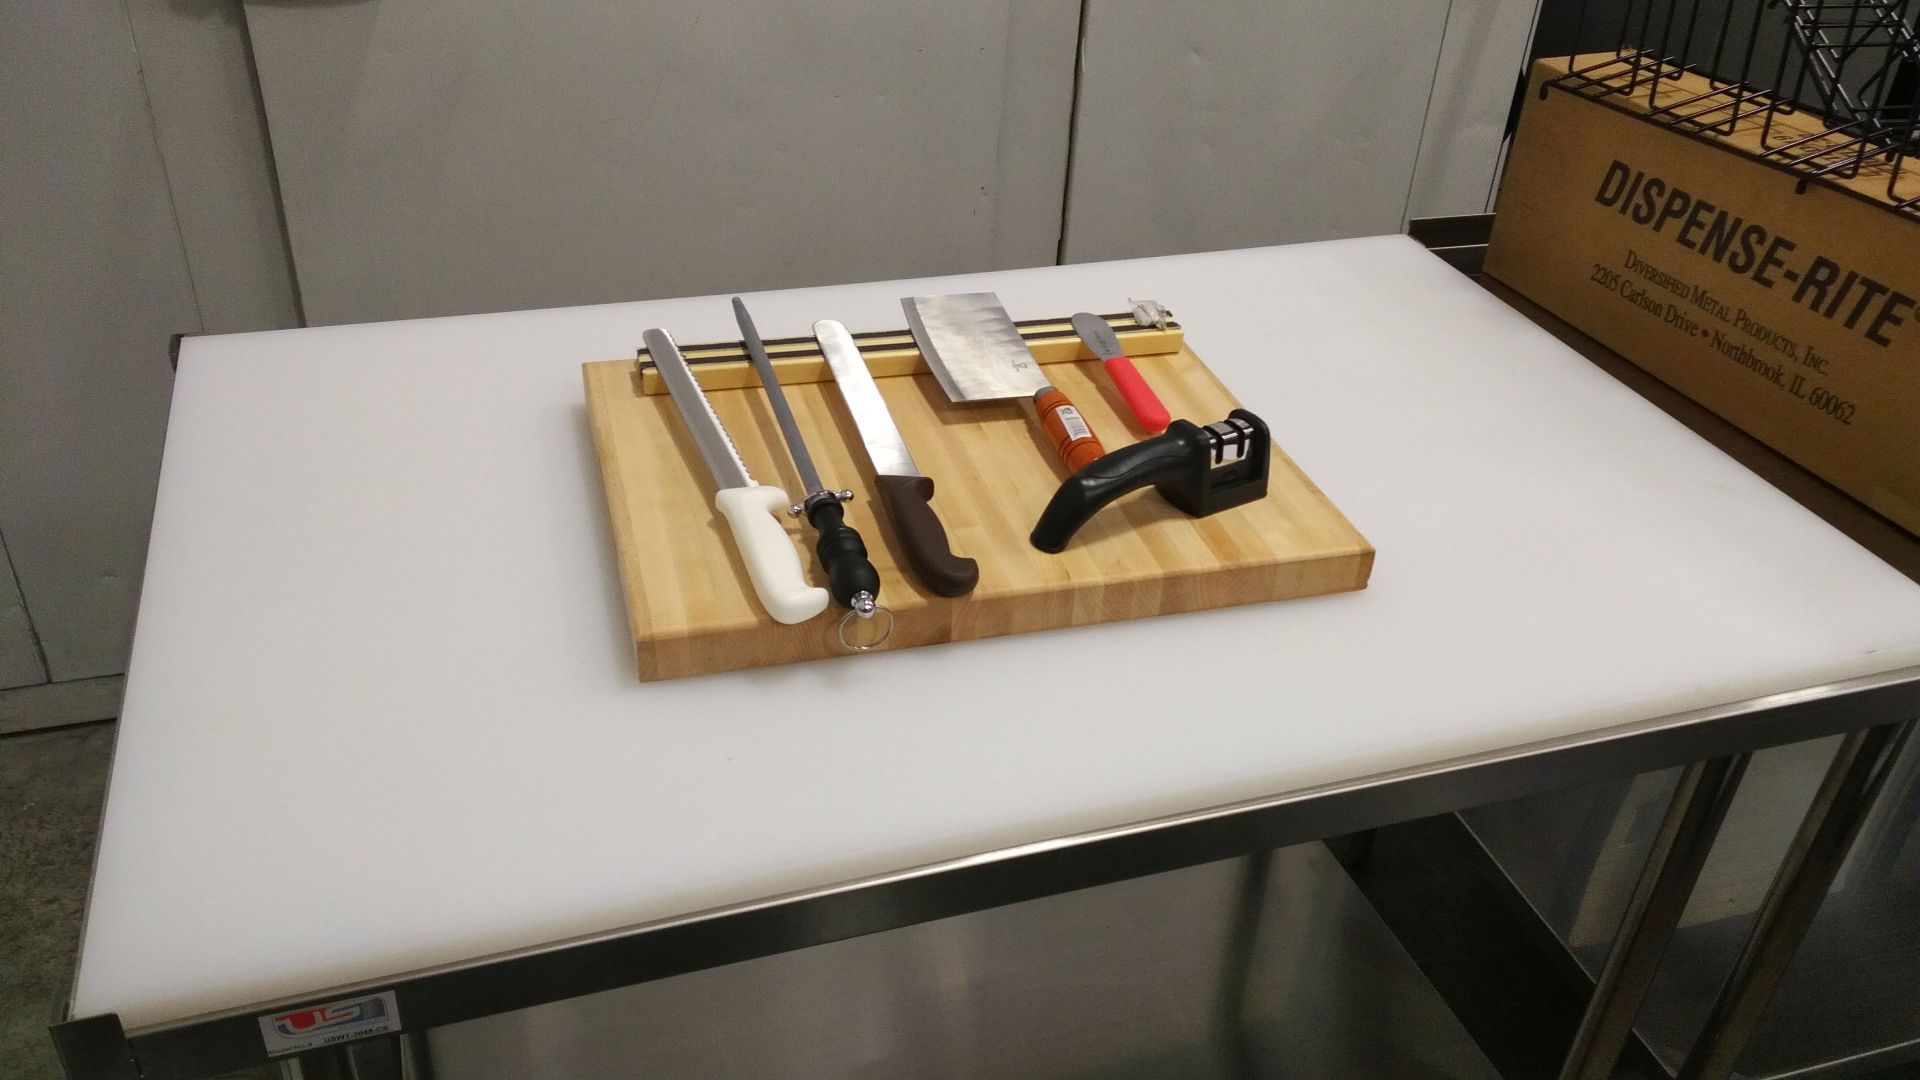 Auctioneer Special - Knives & Cutting Board 20" x 15" - Image 5 of 5